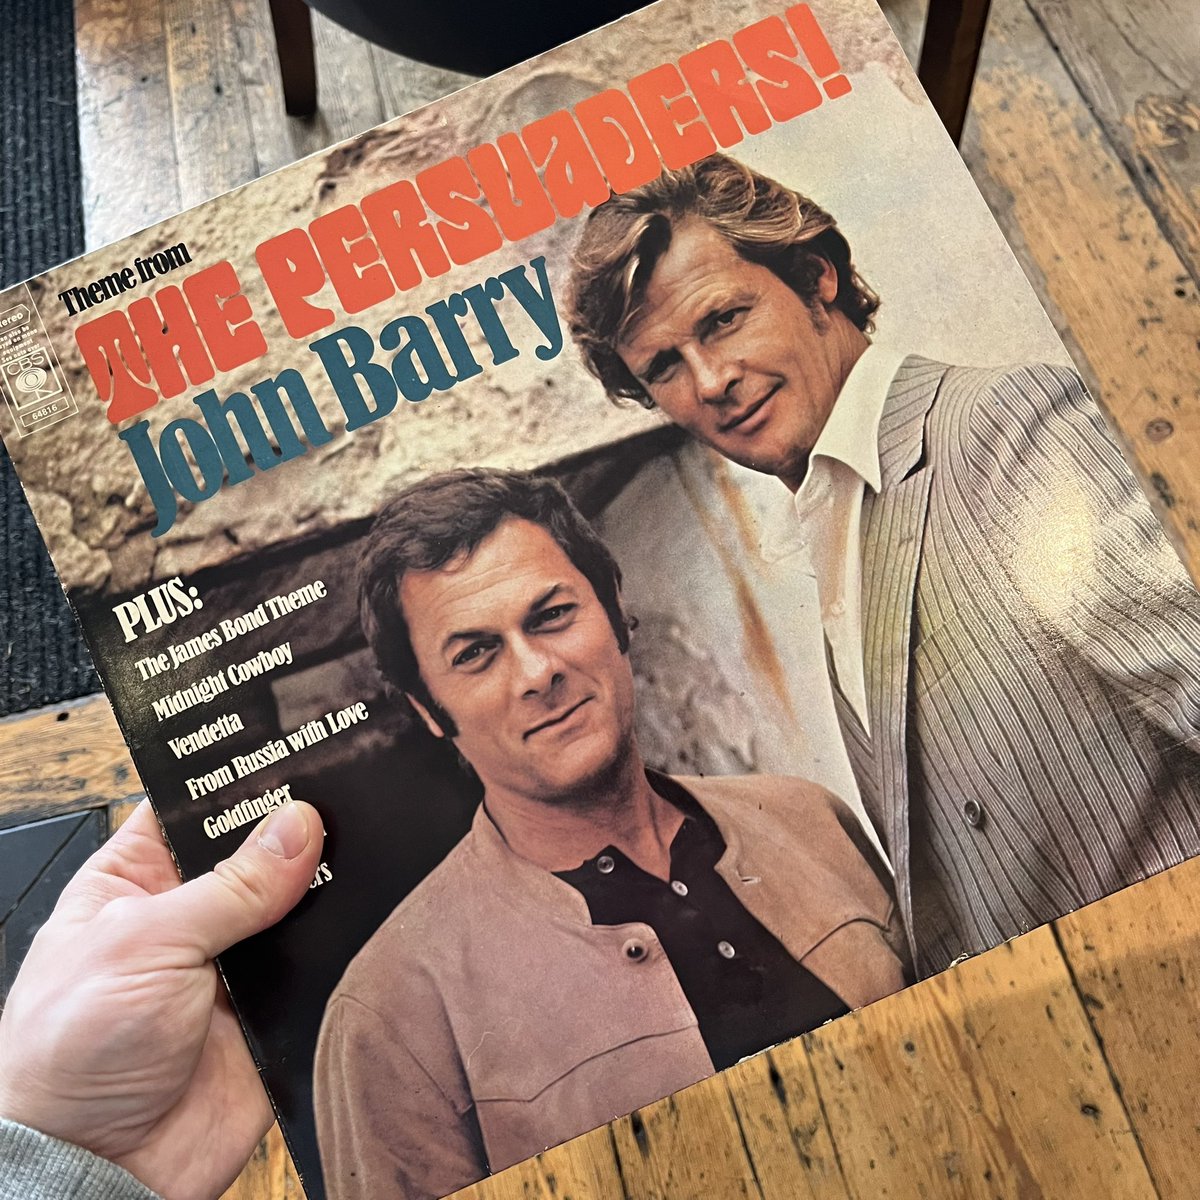 Today’s record shop purchase, seems rather apt! #rogermoore #thepersuaders #johnbarry #jamesbond #vinyl